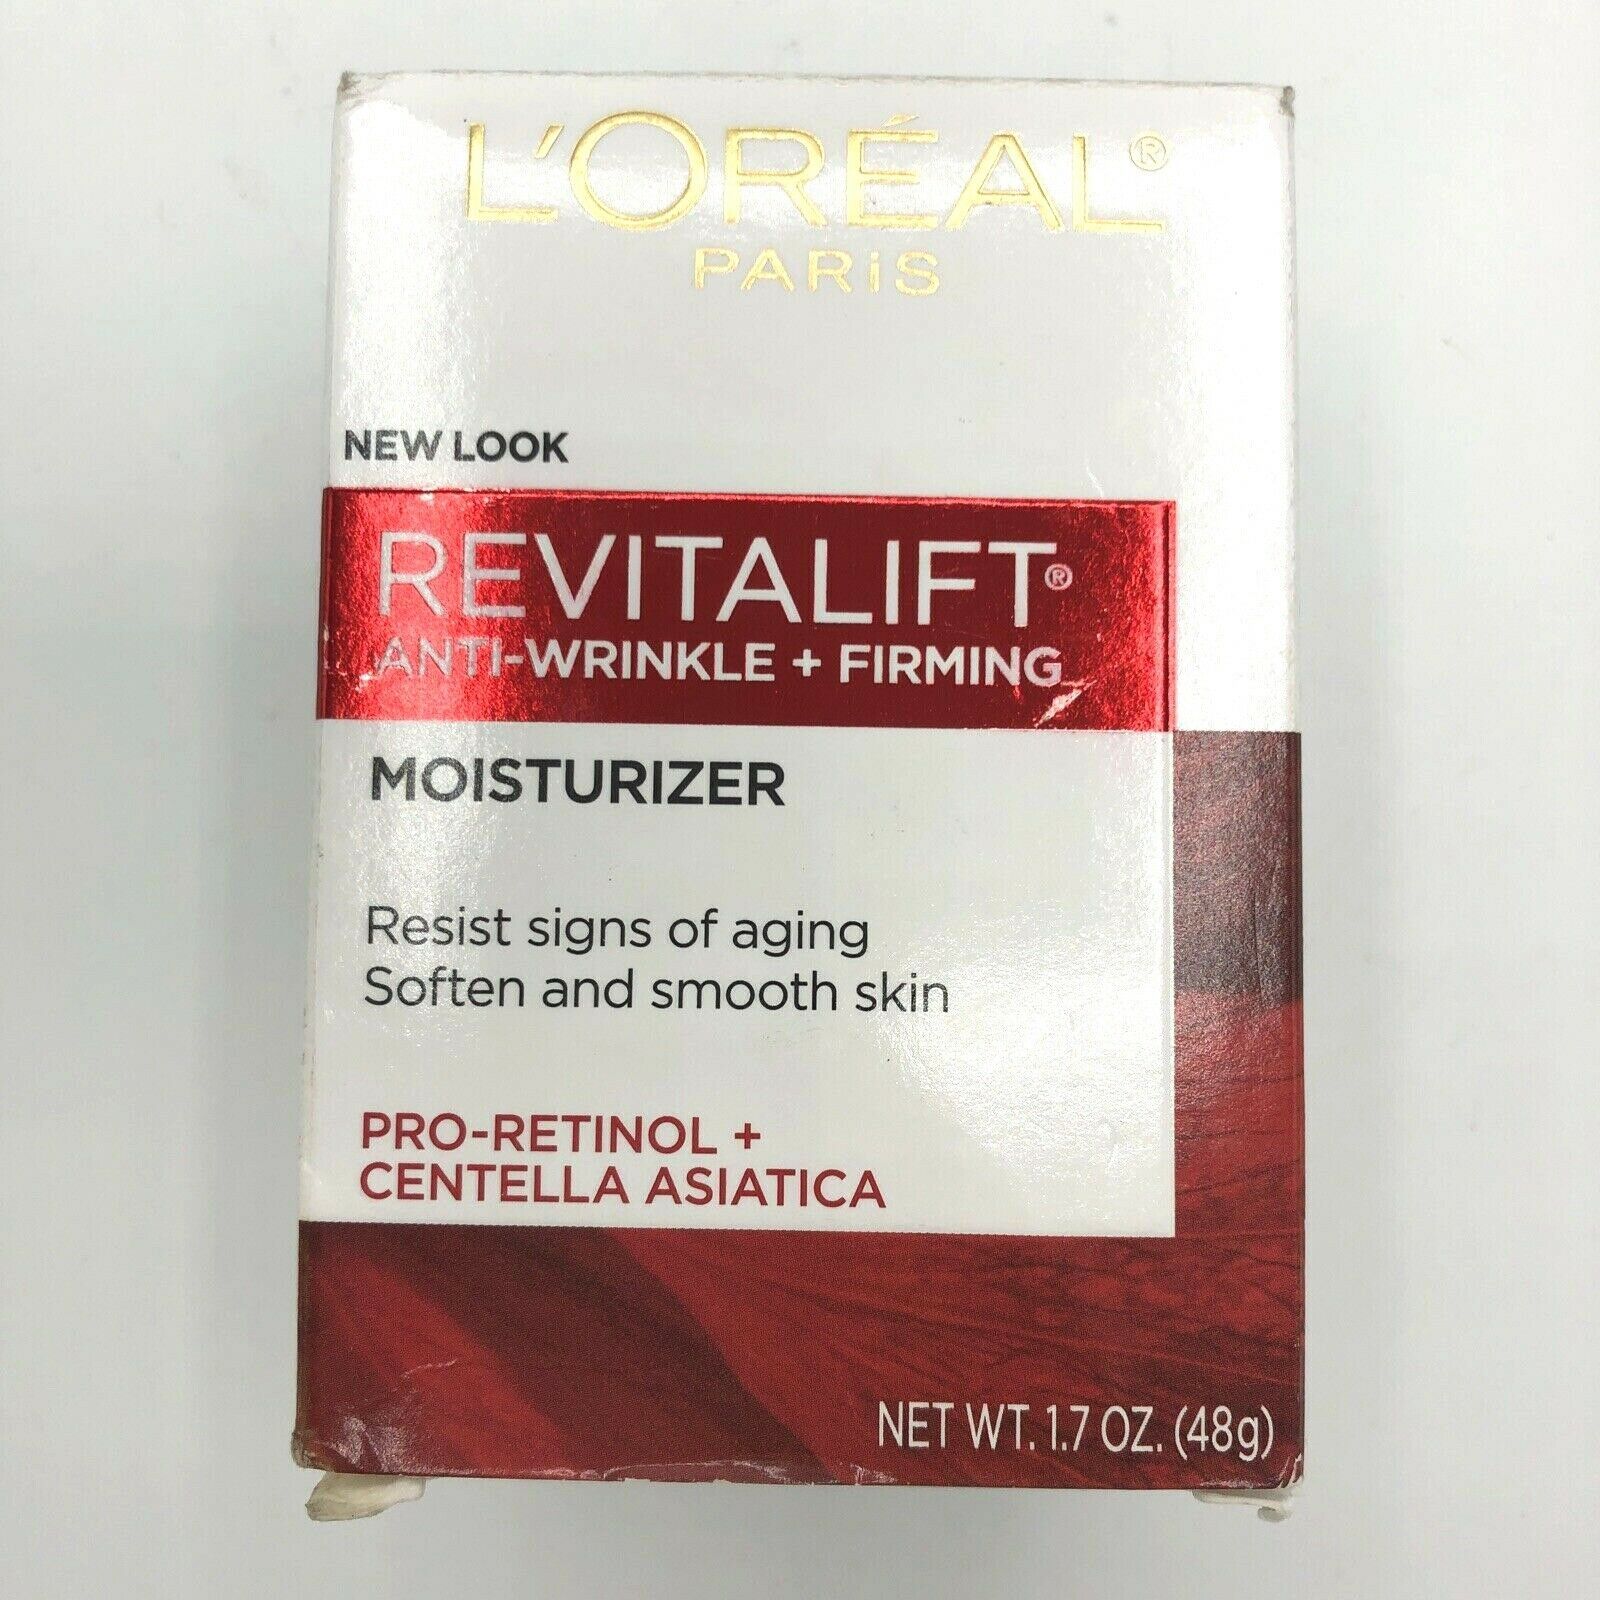 Primary image for L'Oreal Day Revitalift Face & Neck Anti-Wrinkle & Firming Moisturizer 1.7 oz